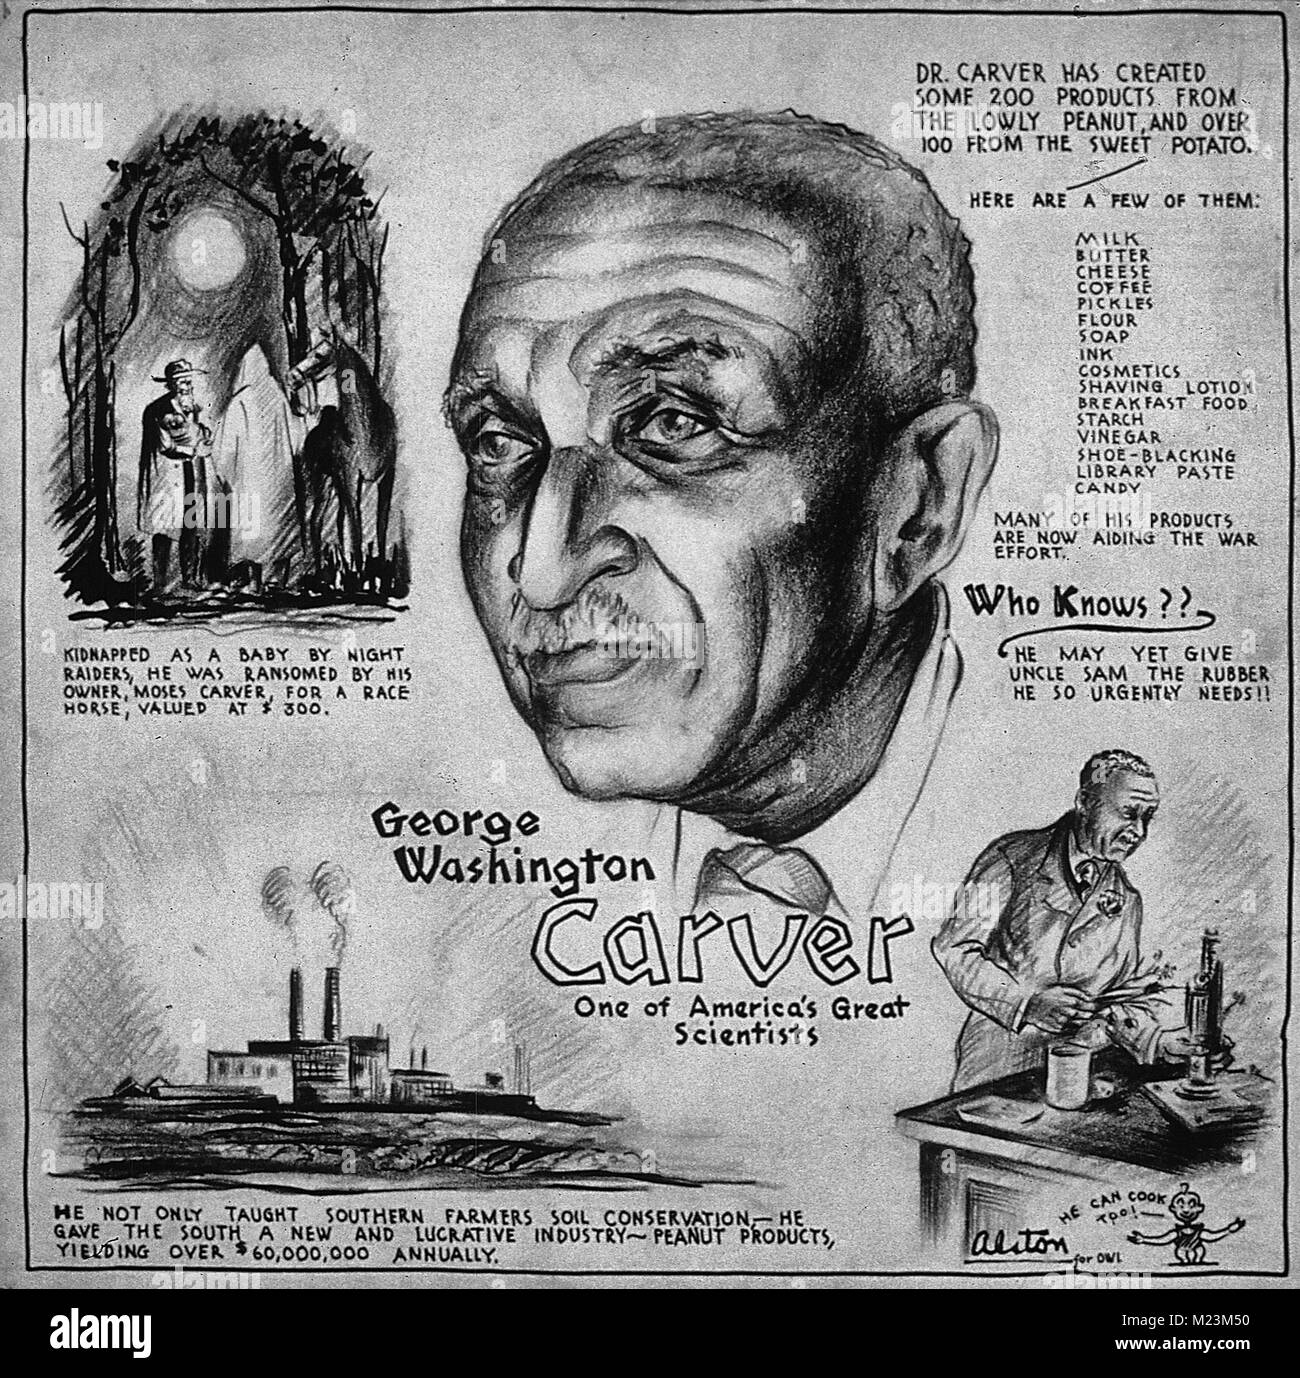 George Washington Carver - One of America's Greatest Scientists - Poster, circa 1943 Stock Photo